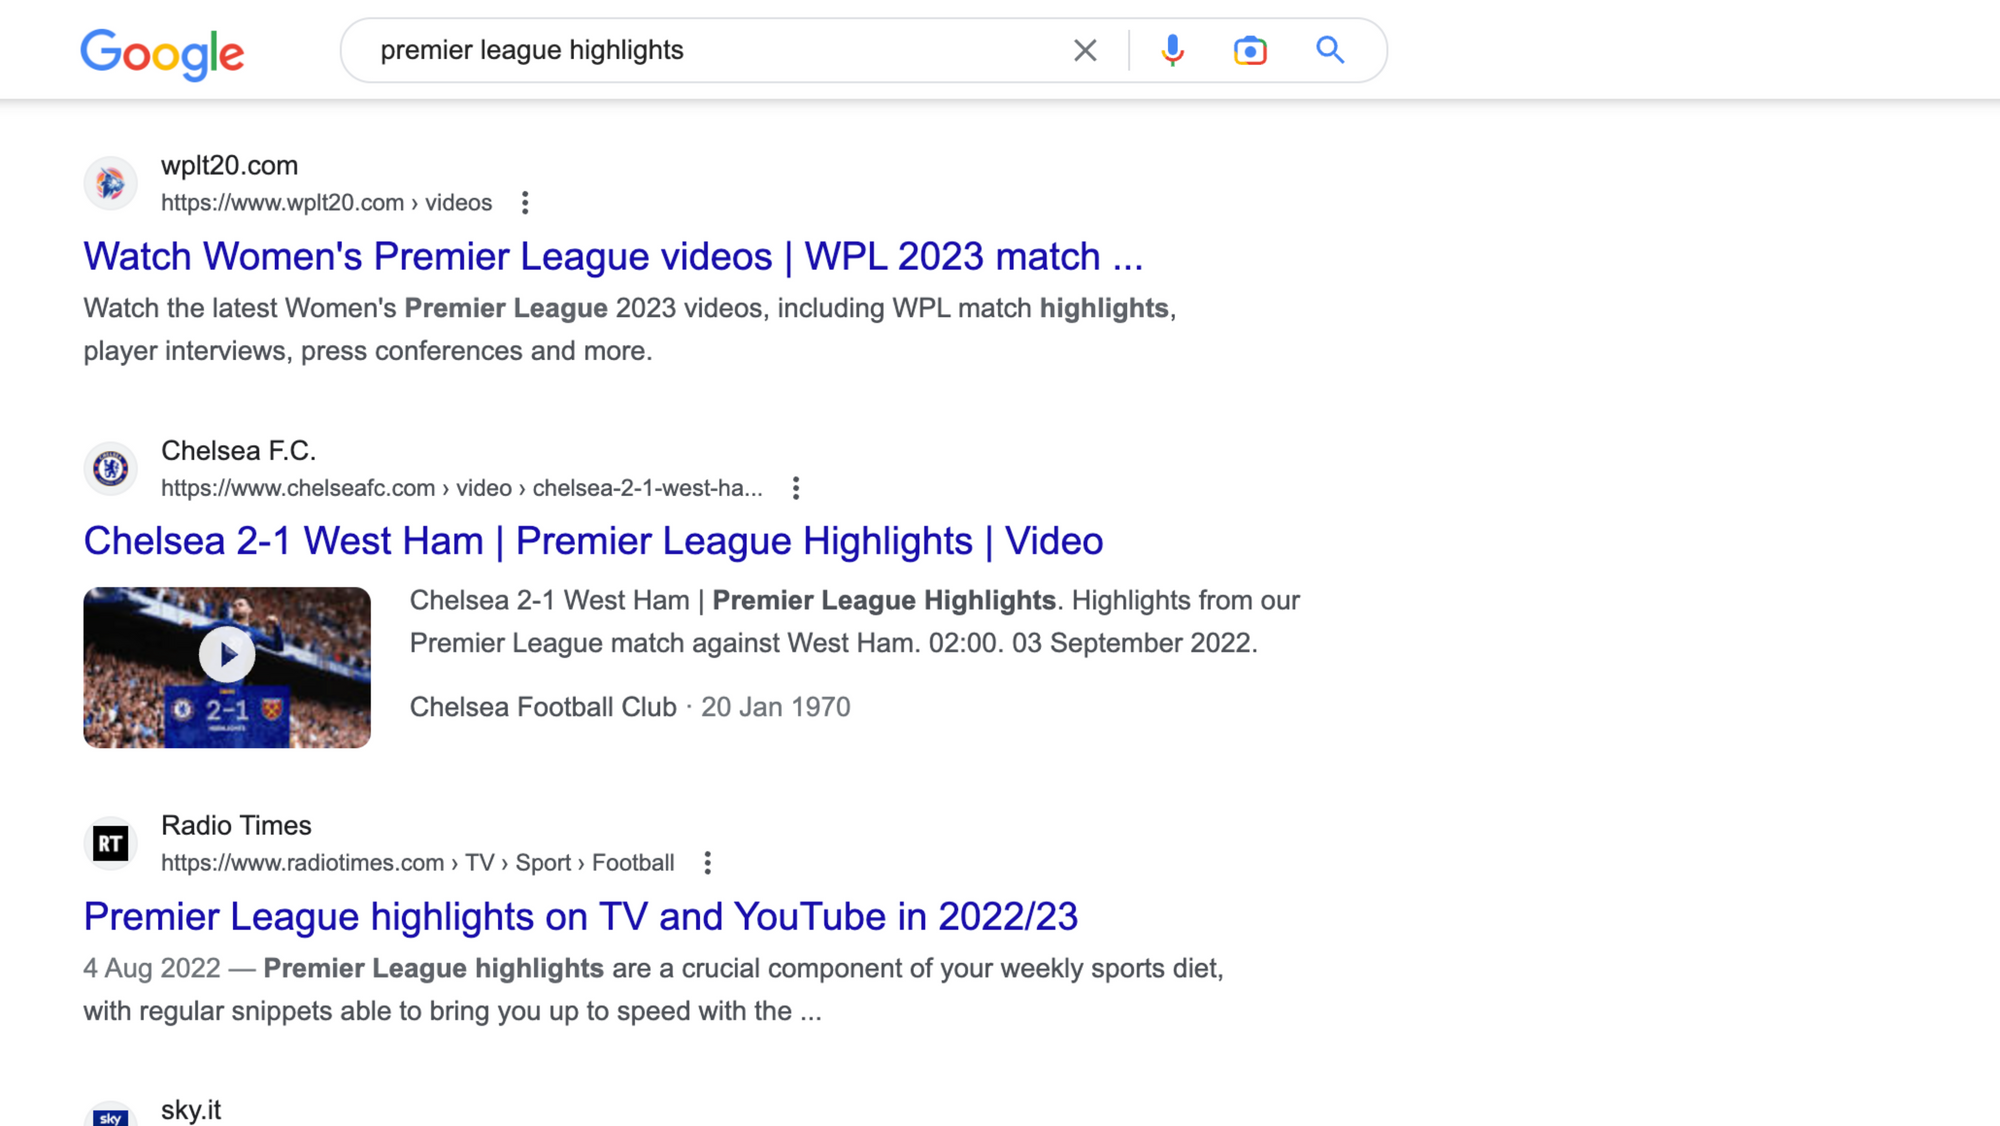  Example of structured data and where videos can appear on Google